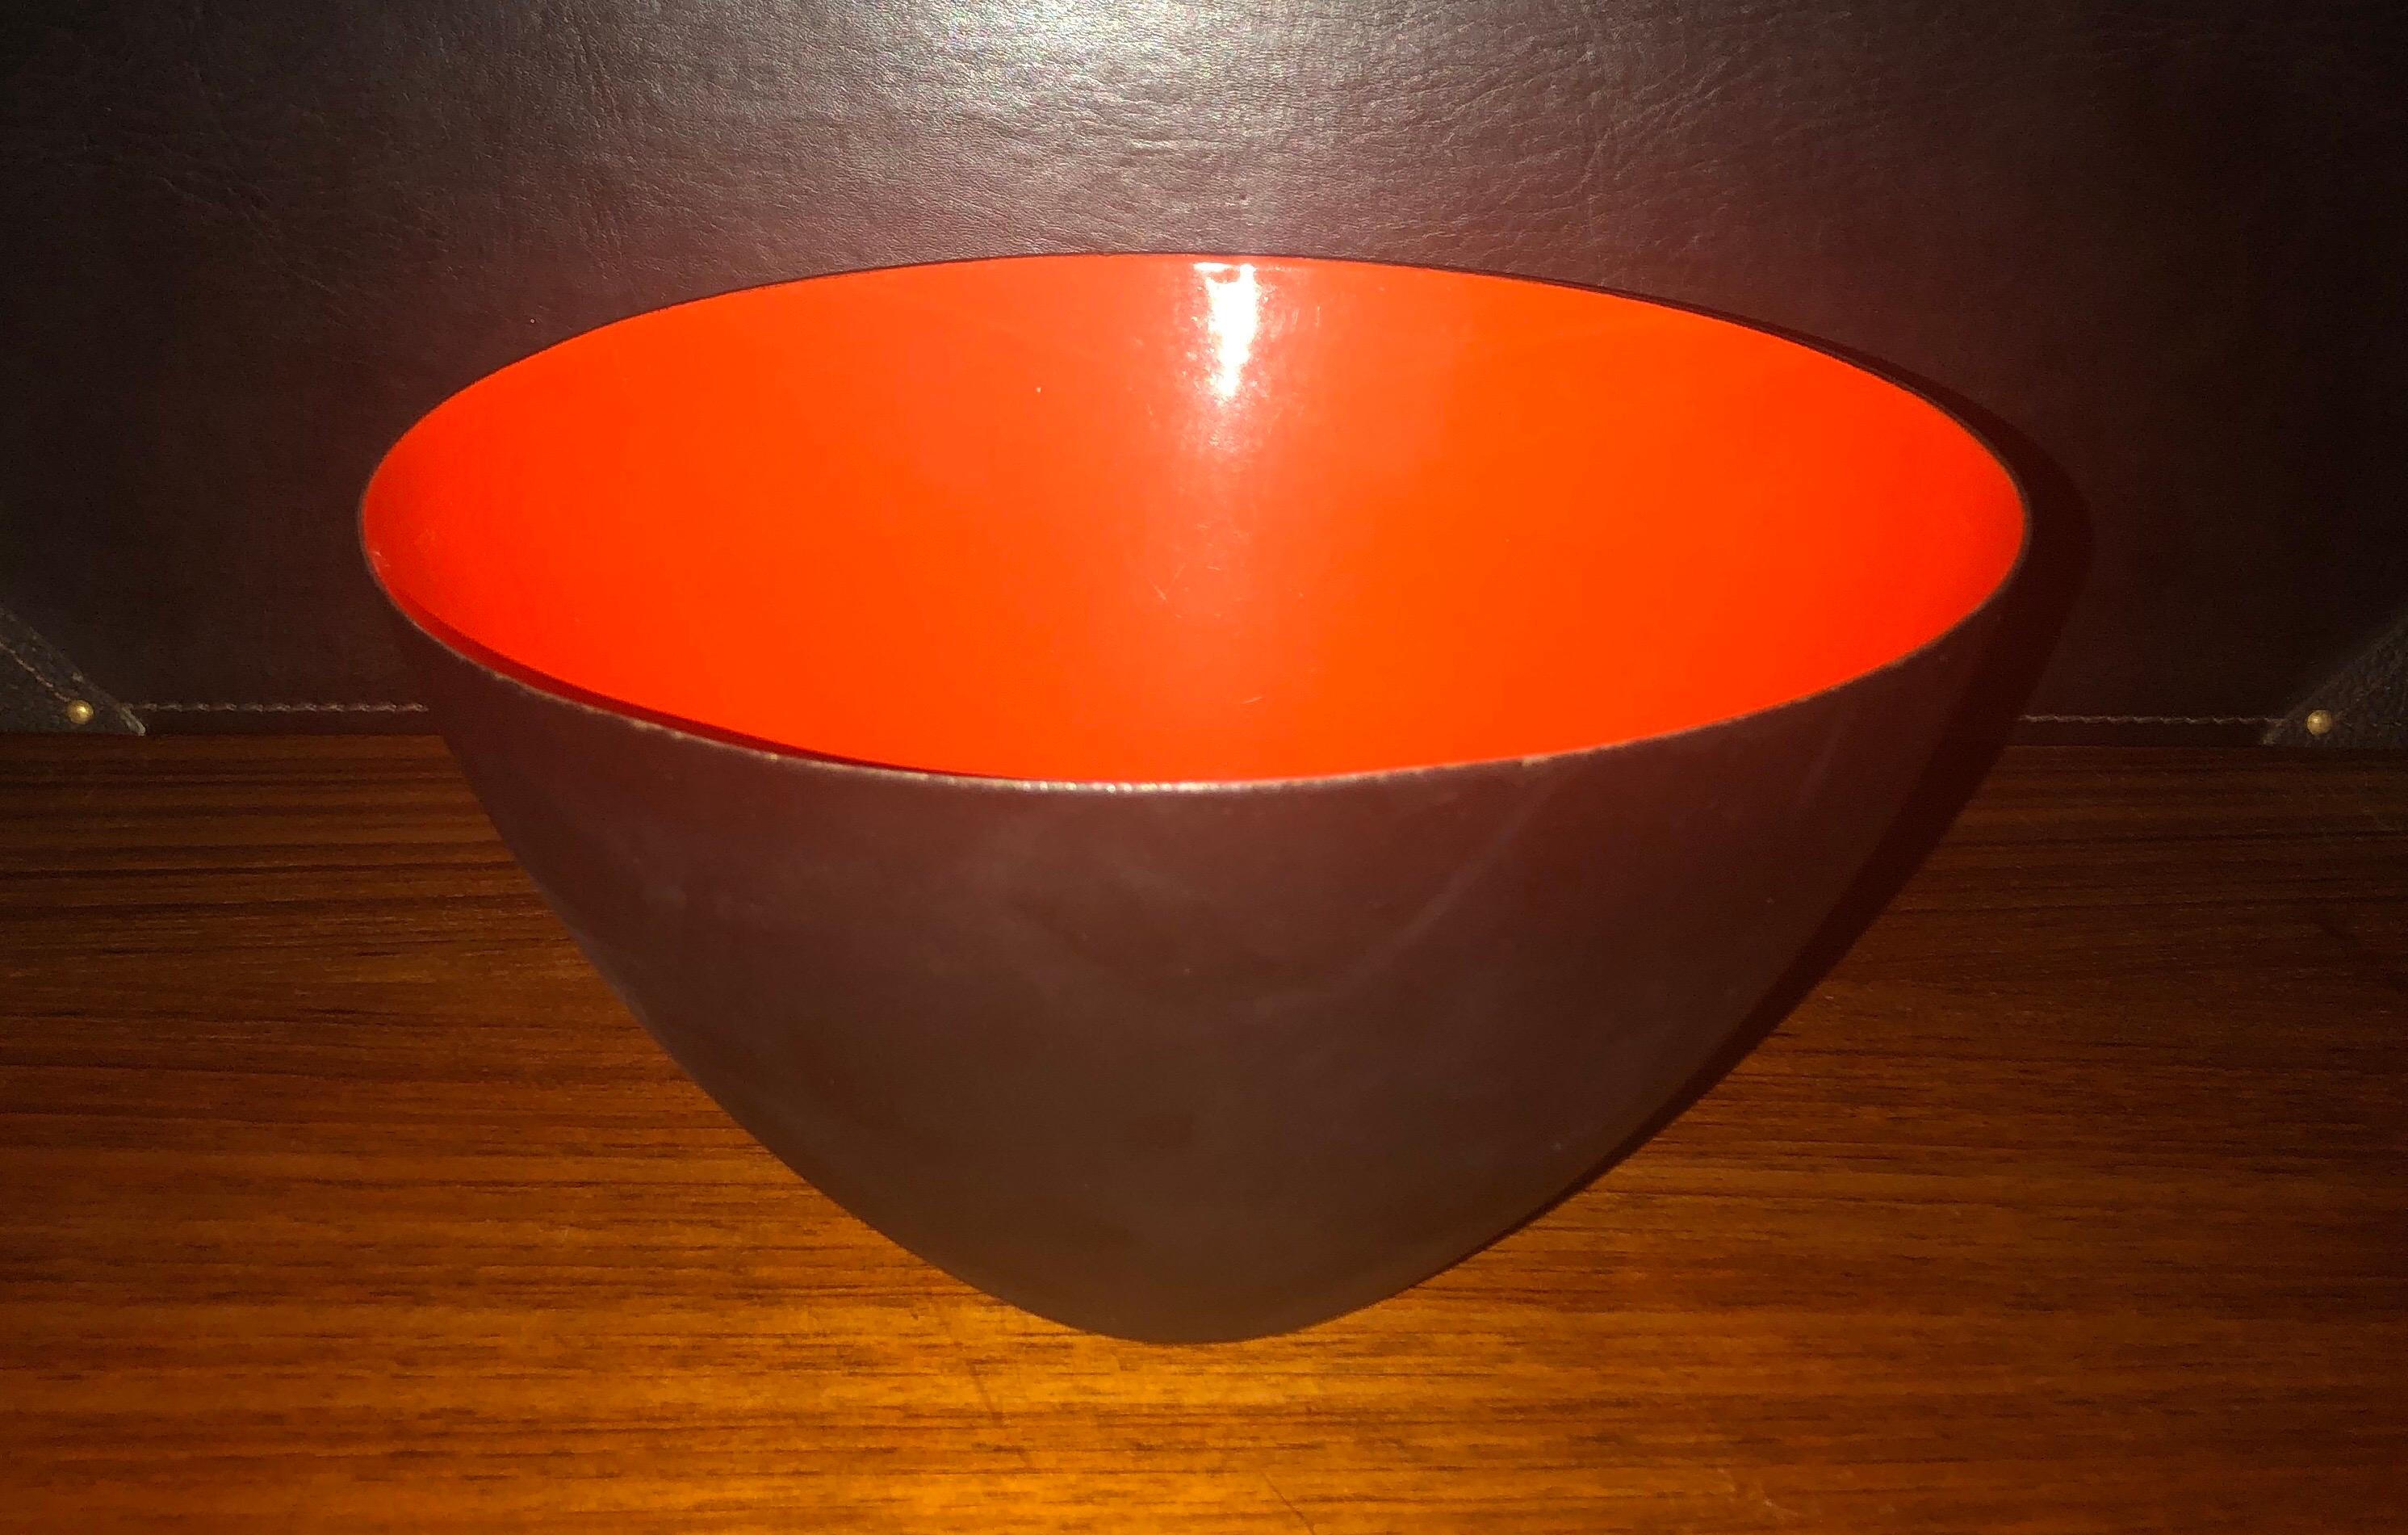 Danish modern orange / black enamel Krenit bowl by Herbert Krenchel for Torben Orskov, circa 1950s. Beautiful color and condition on this vintage piece with no chips to the enamel, but some minor wear on the outside of the bowl. Signed on the